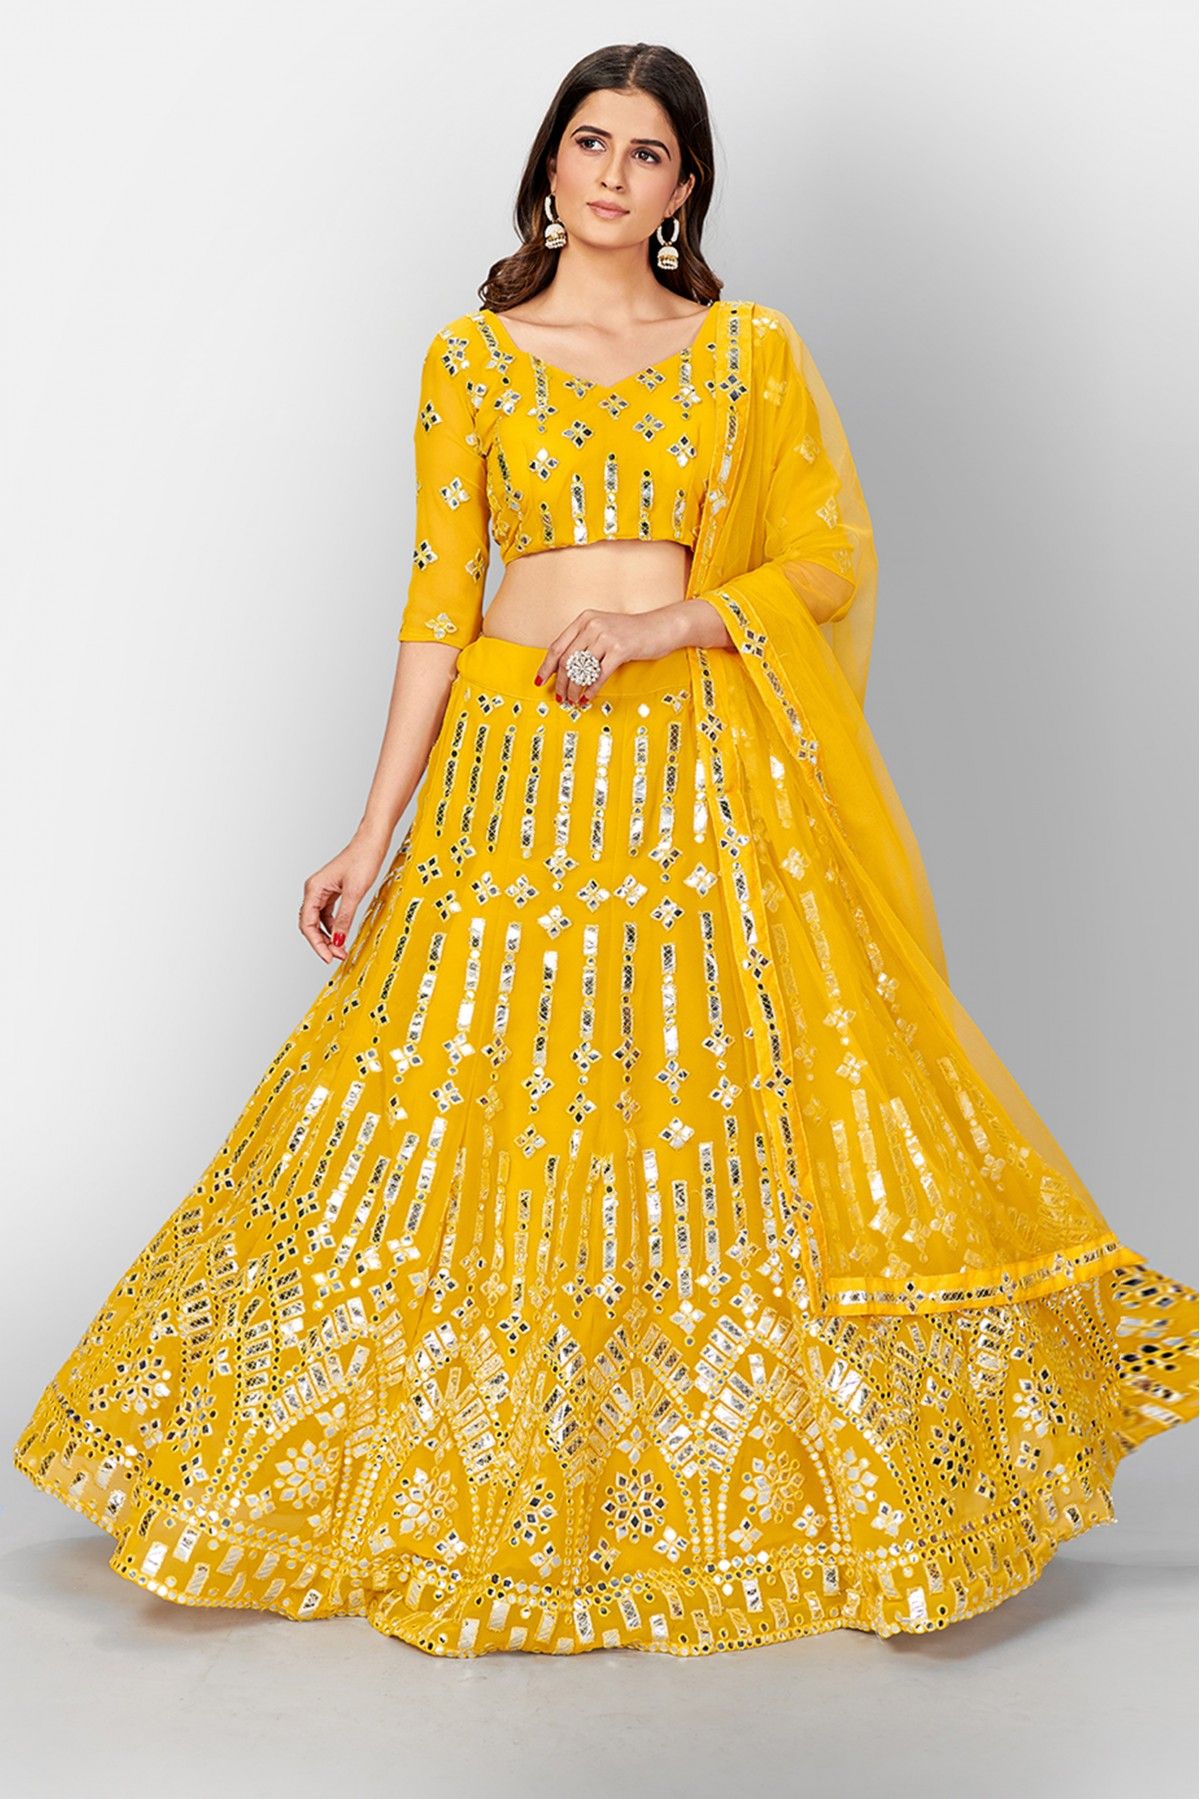 Georgette Embroidery Lehenga Choli In Yellow Colour - LD5411760